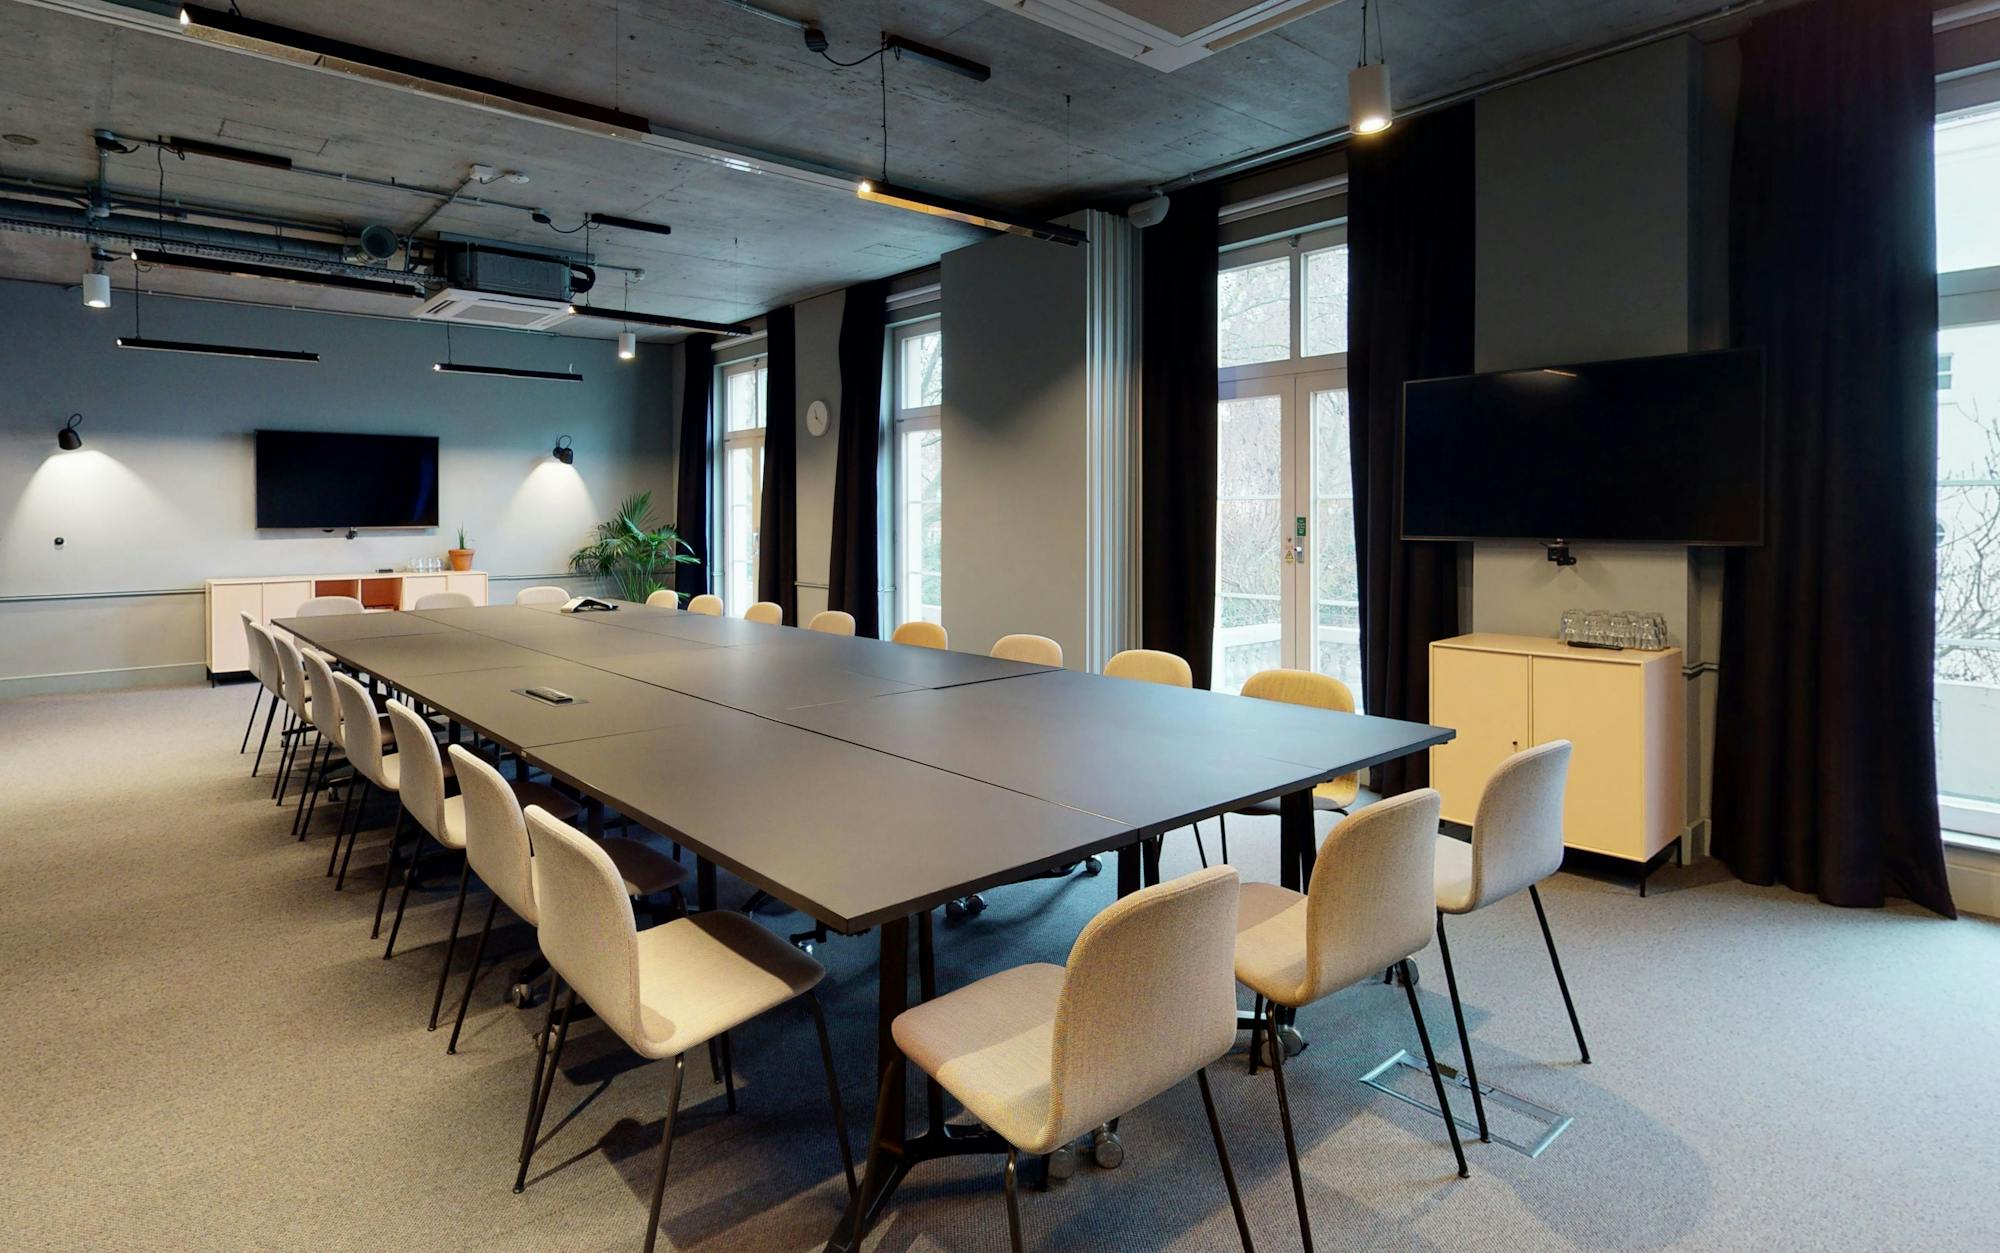 Combined Meeting Rooms 5 & 6